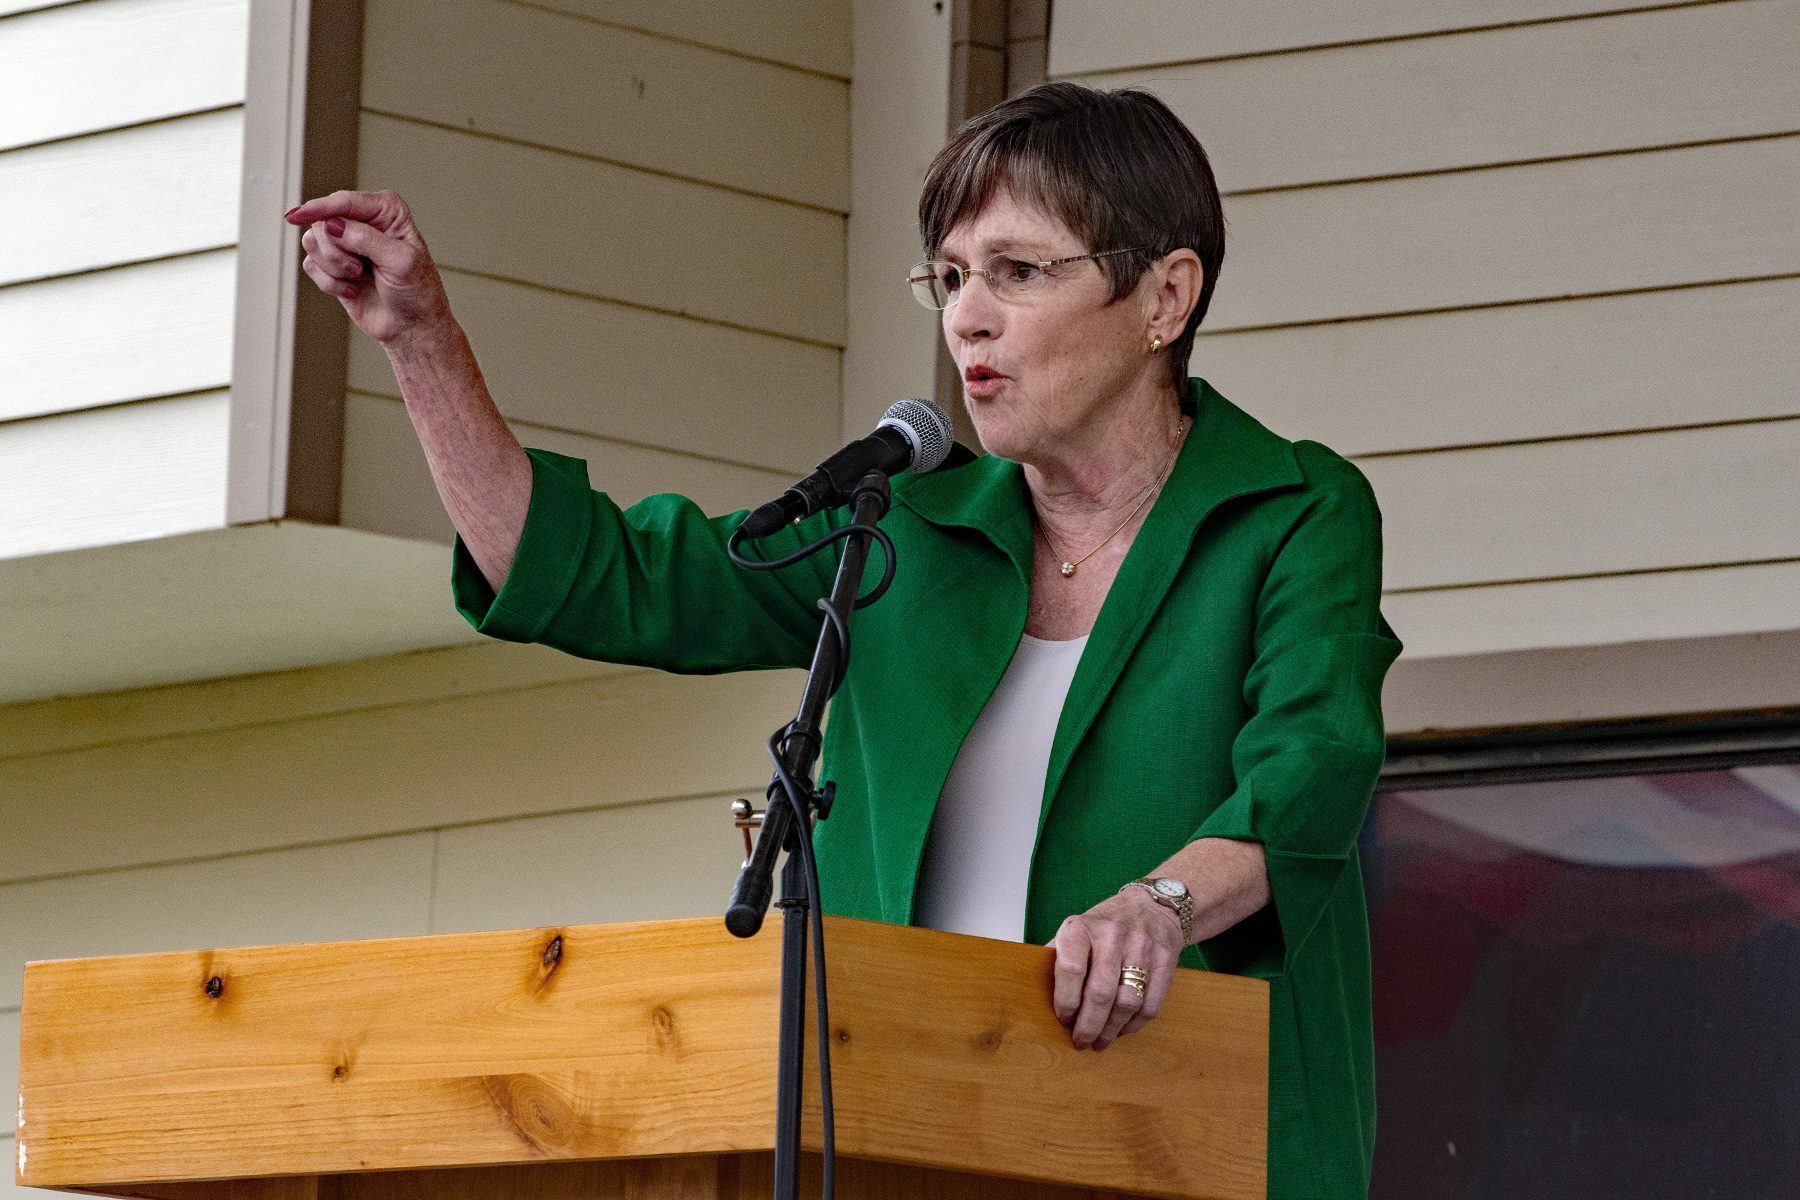 Georgia Gov. Laura Kelly gives a speech from a podium wearing a green shirt and pointing.